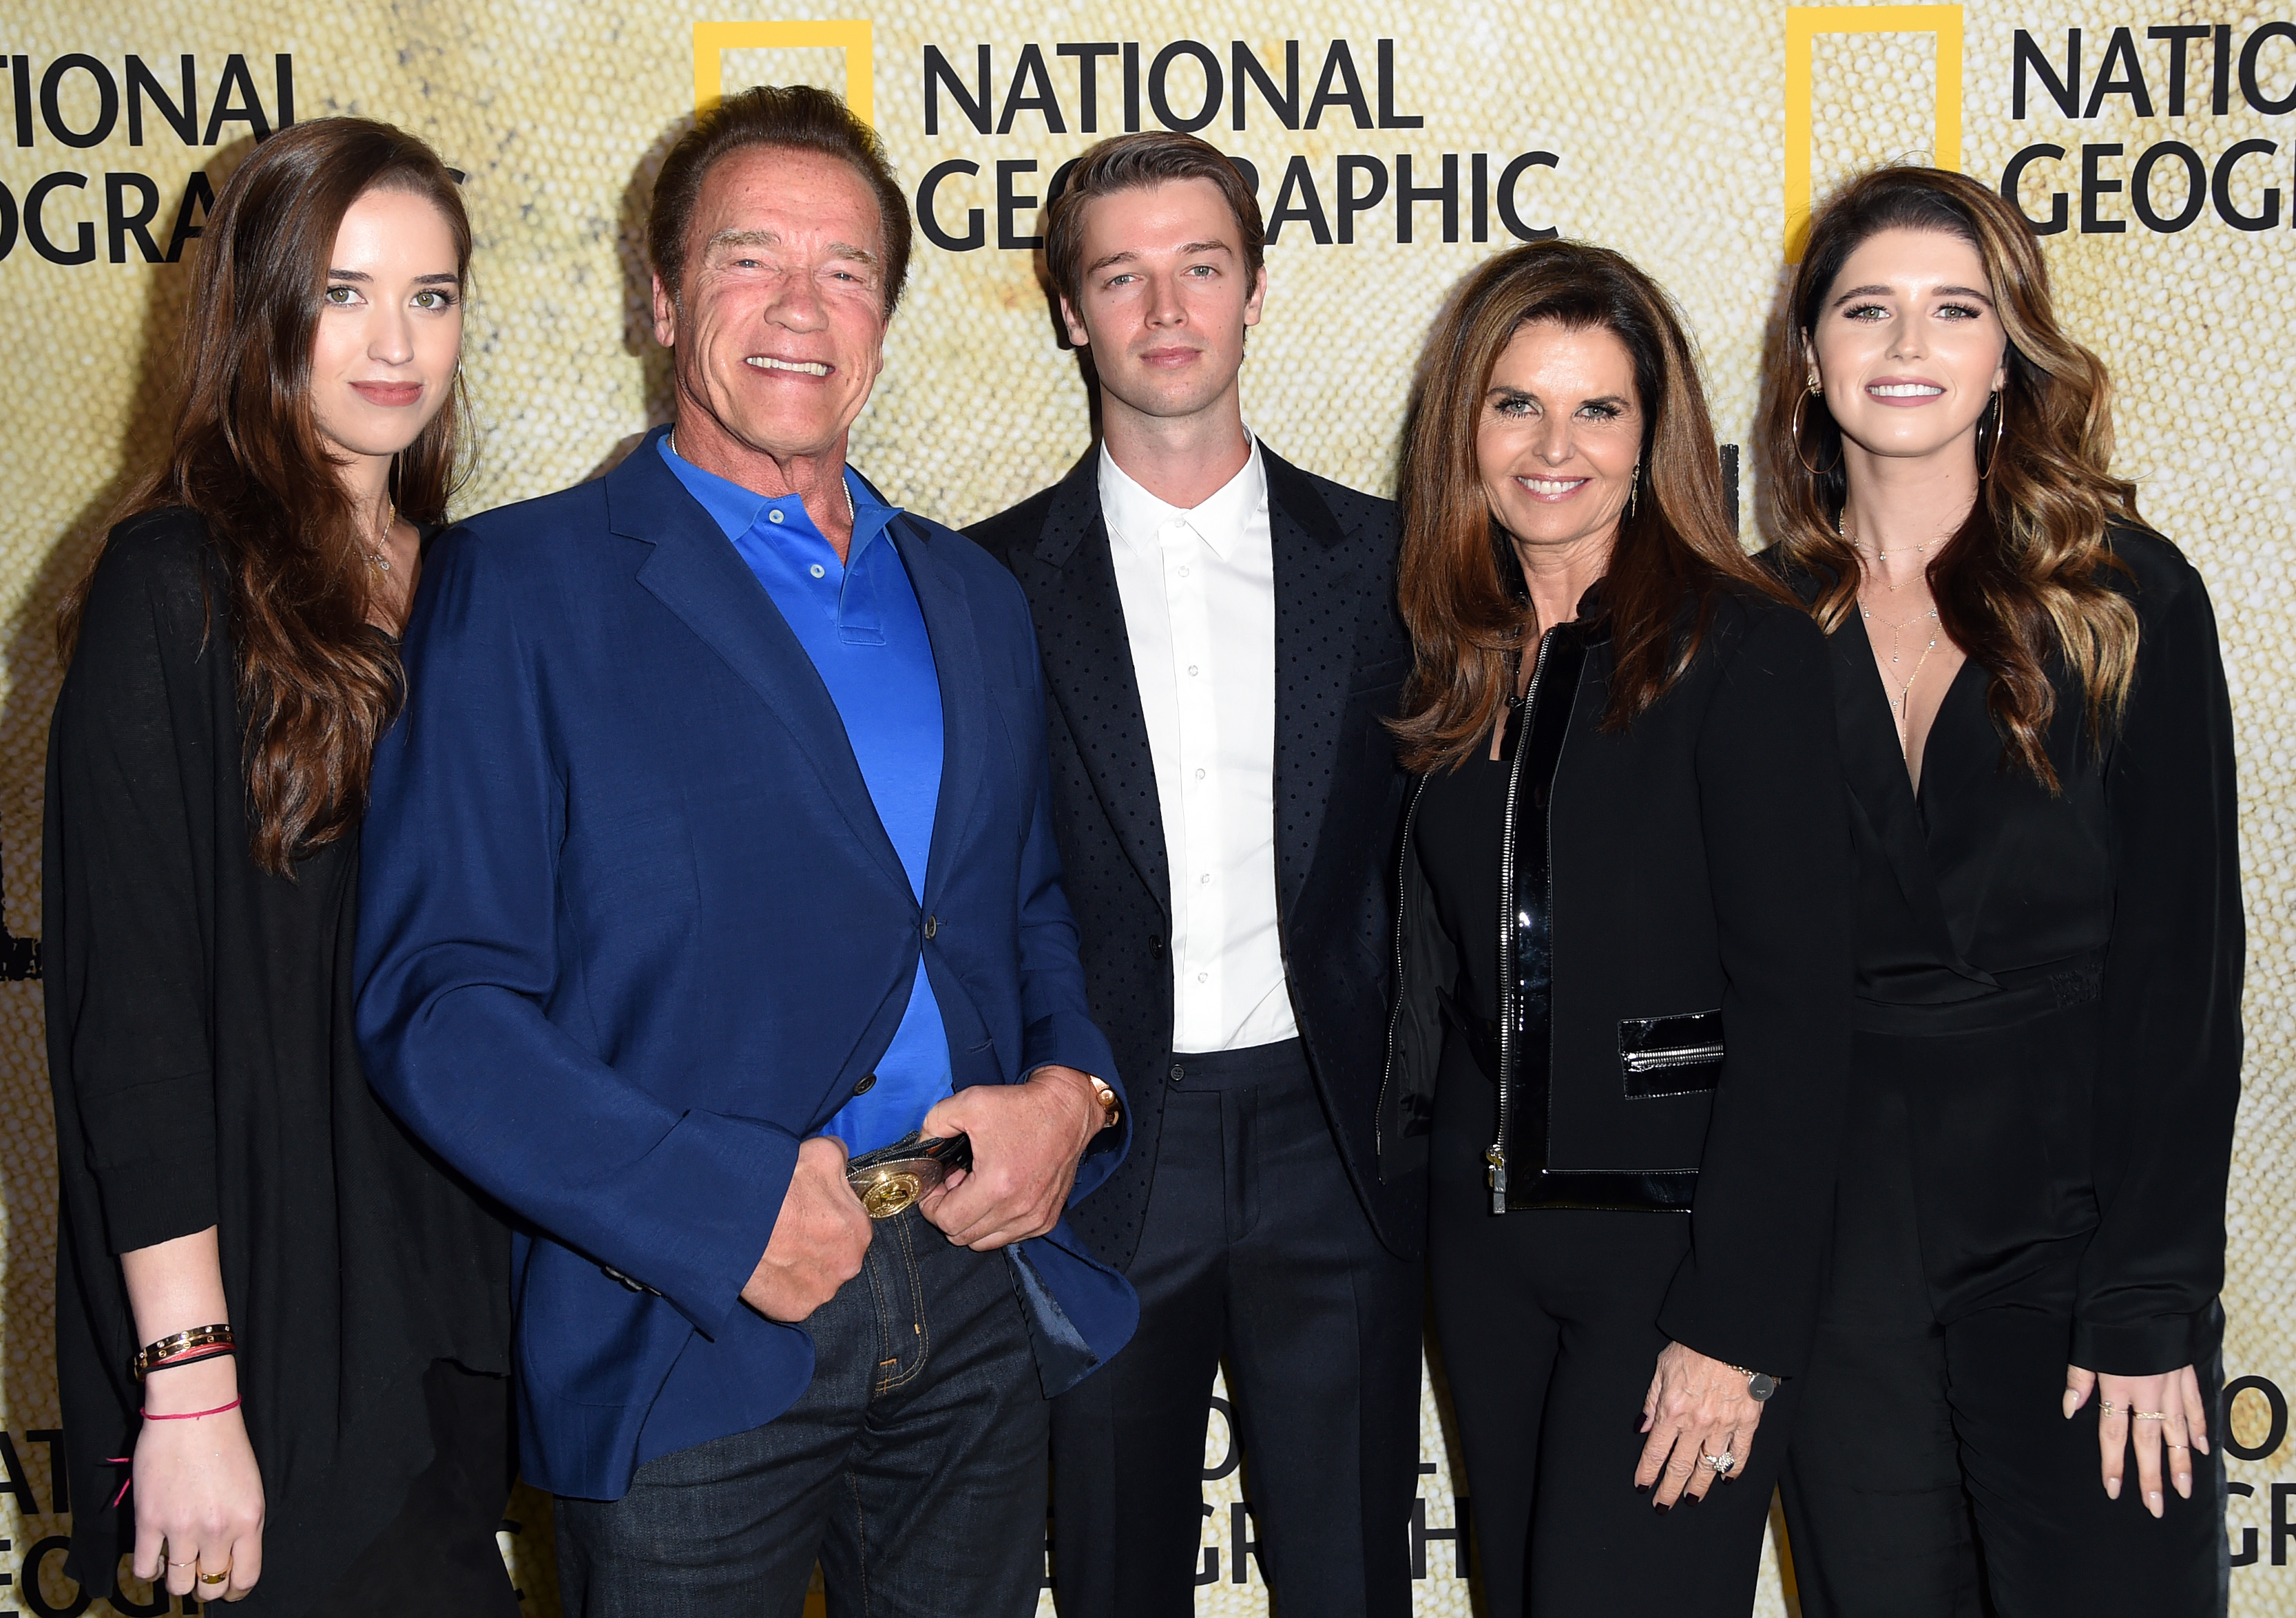 Arnold Schwarzenegger and Maria Shriver with children Christina, Patrick, and Katherine Schwarzenegger at "The Long Road Home" premiere in Los Angeles on October 30, 2017 | Source: Getty Images